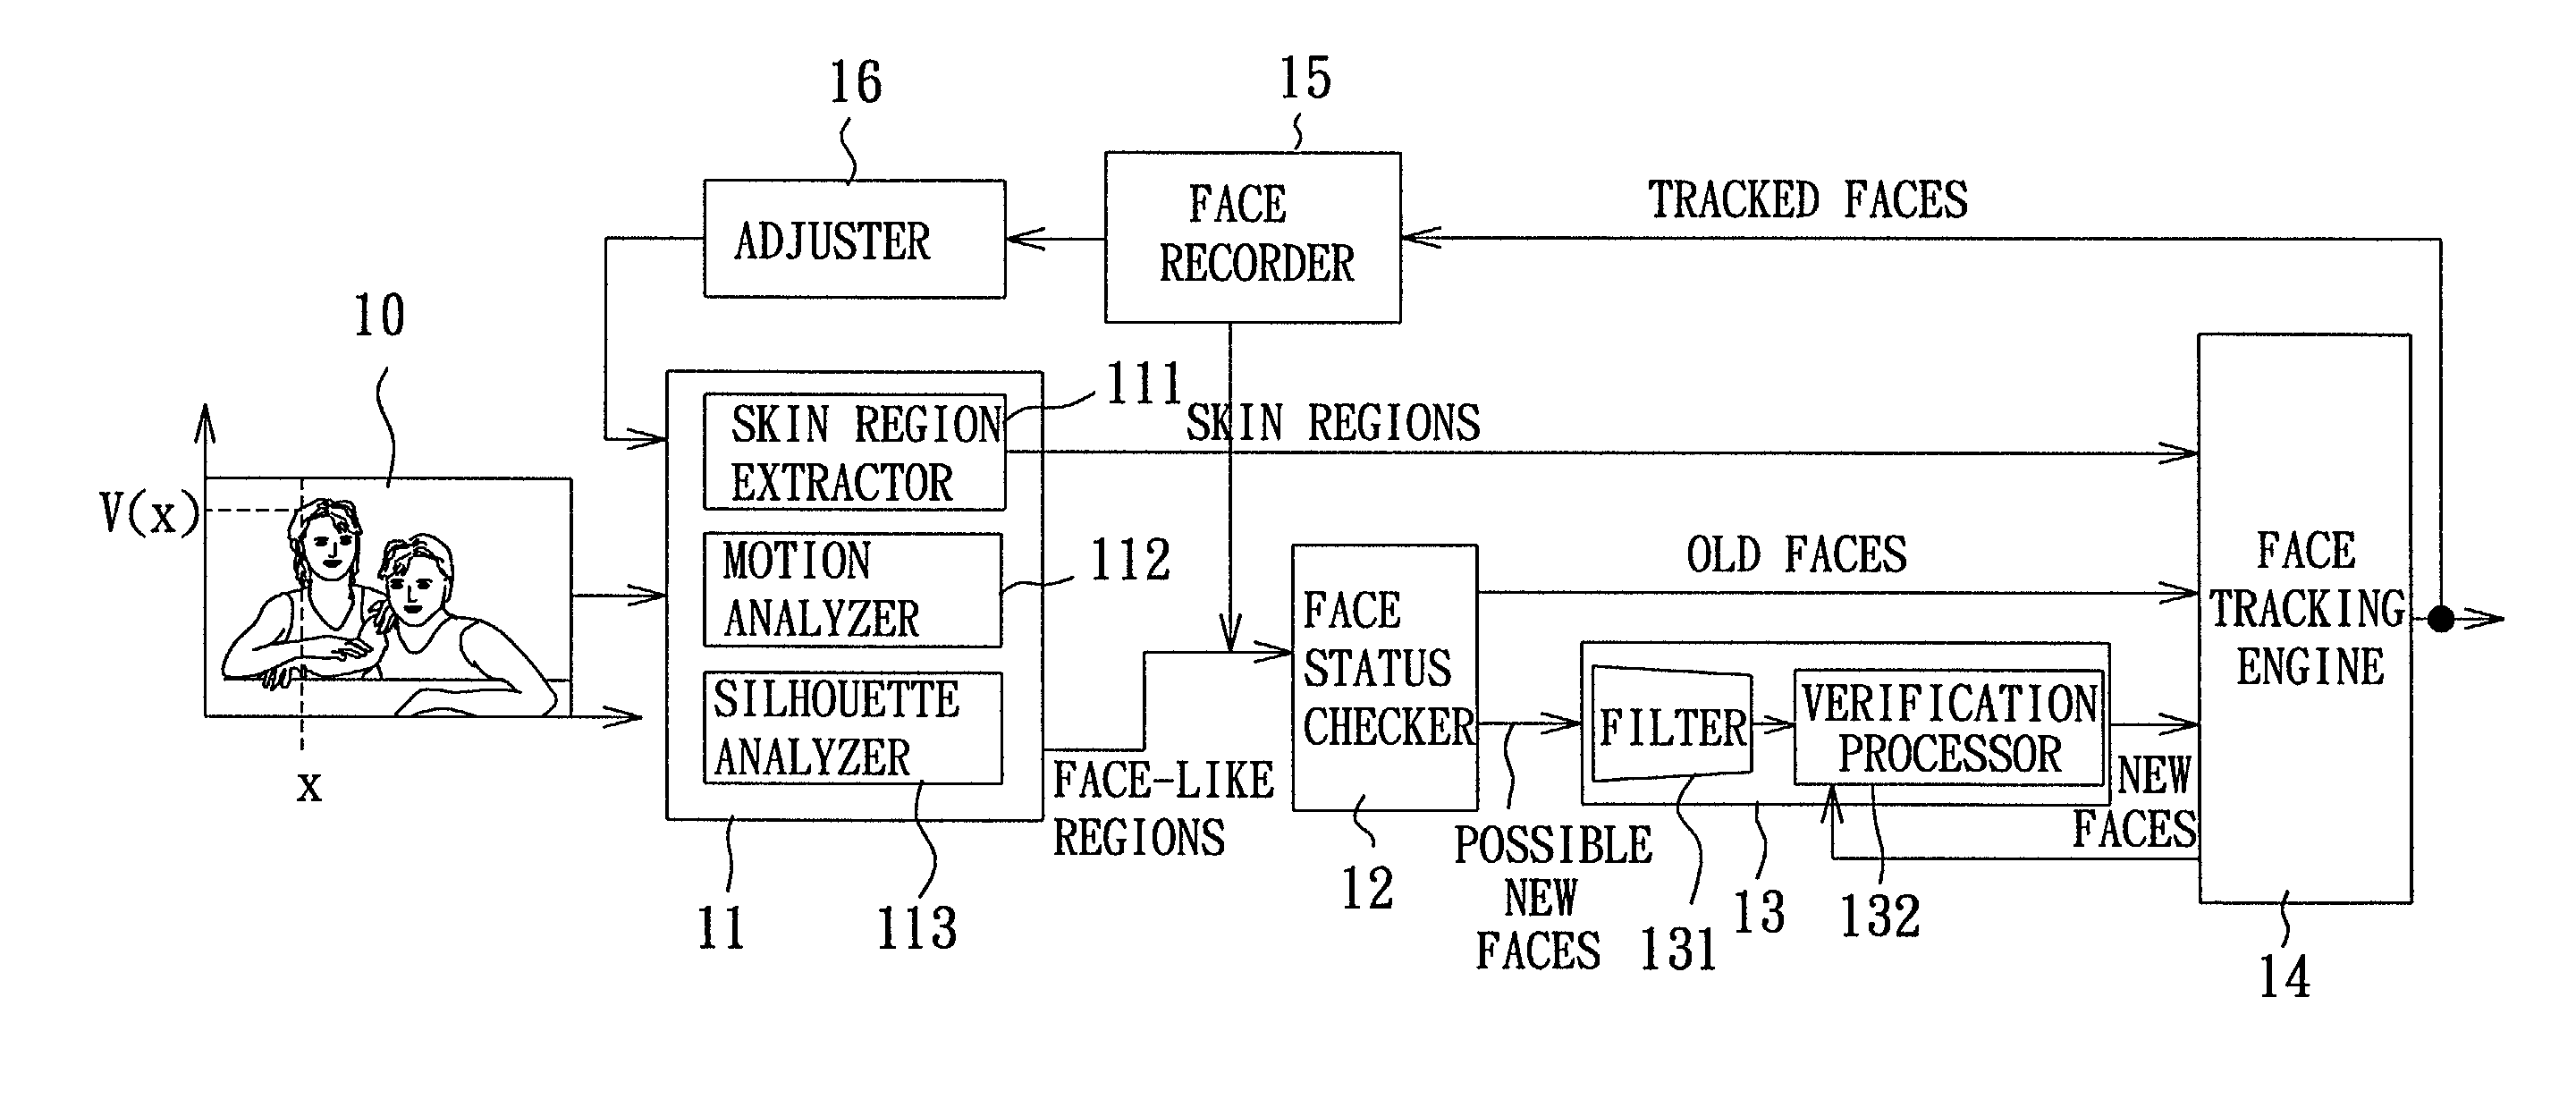 System and method for rapidly tracking multiple faces